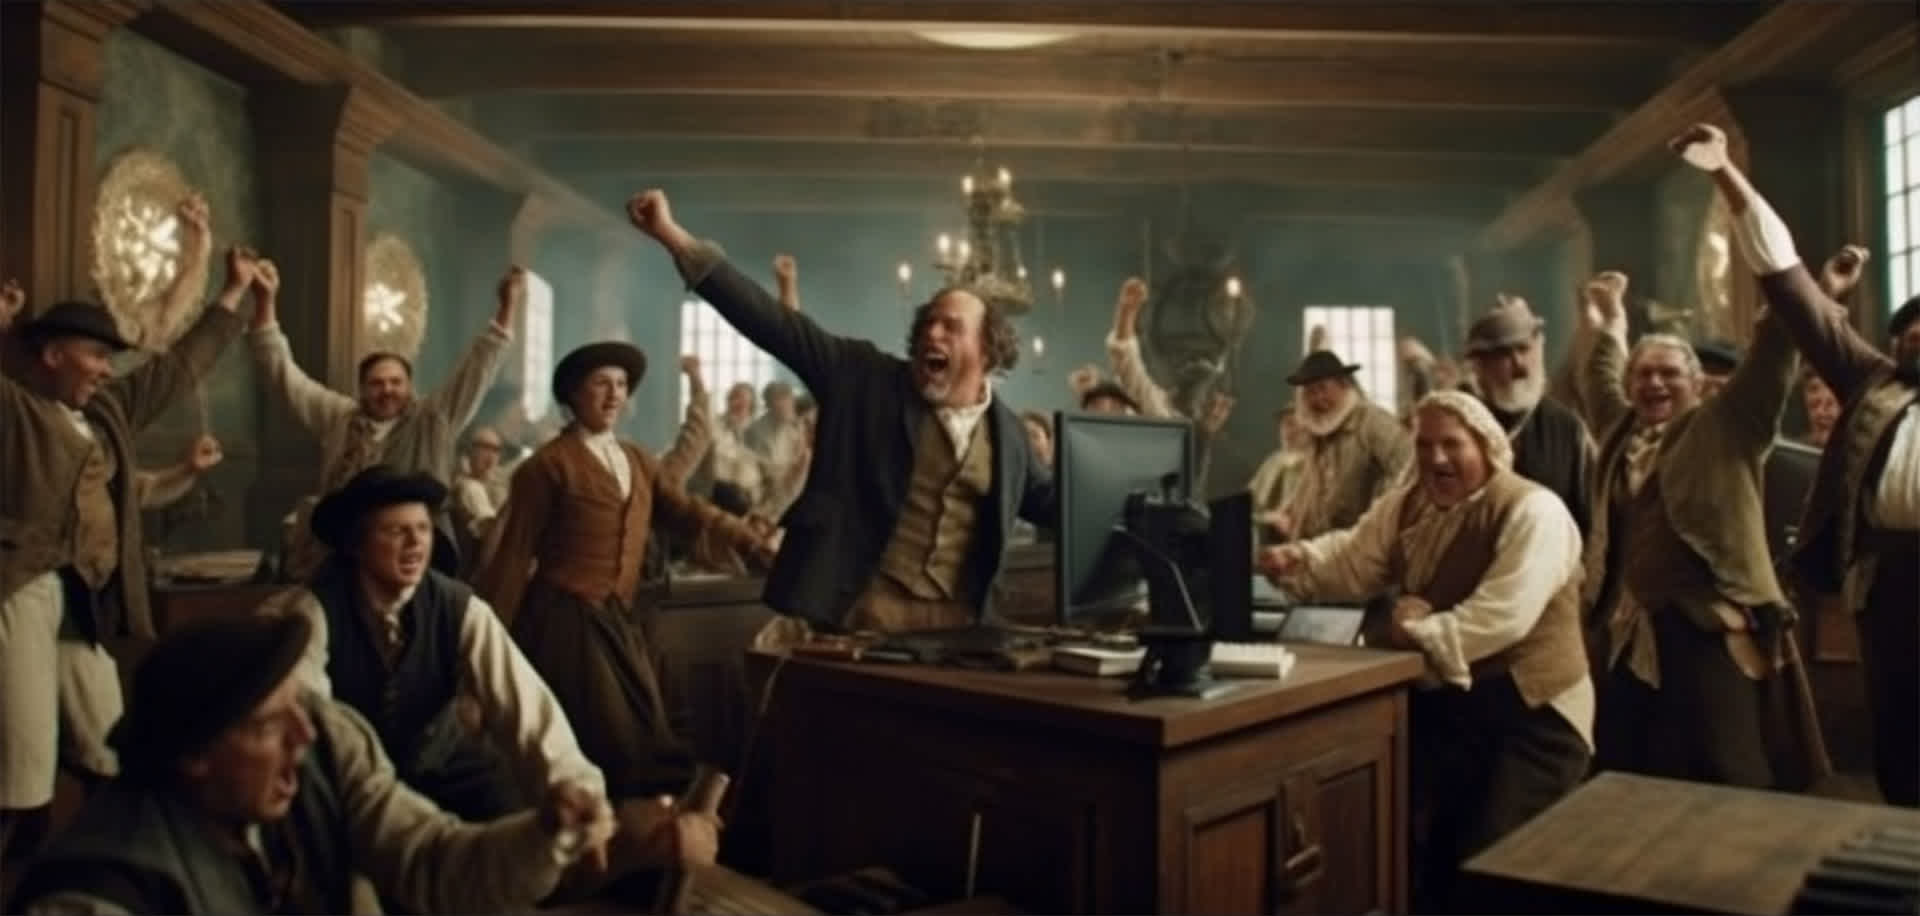 A man cheering behind computer in room full of people in historical themed clothes